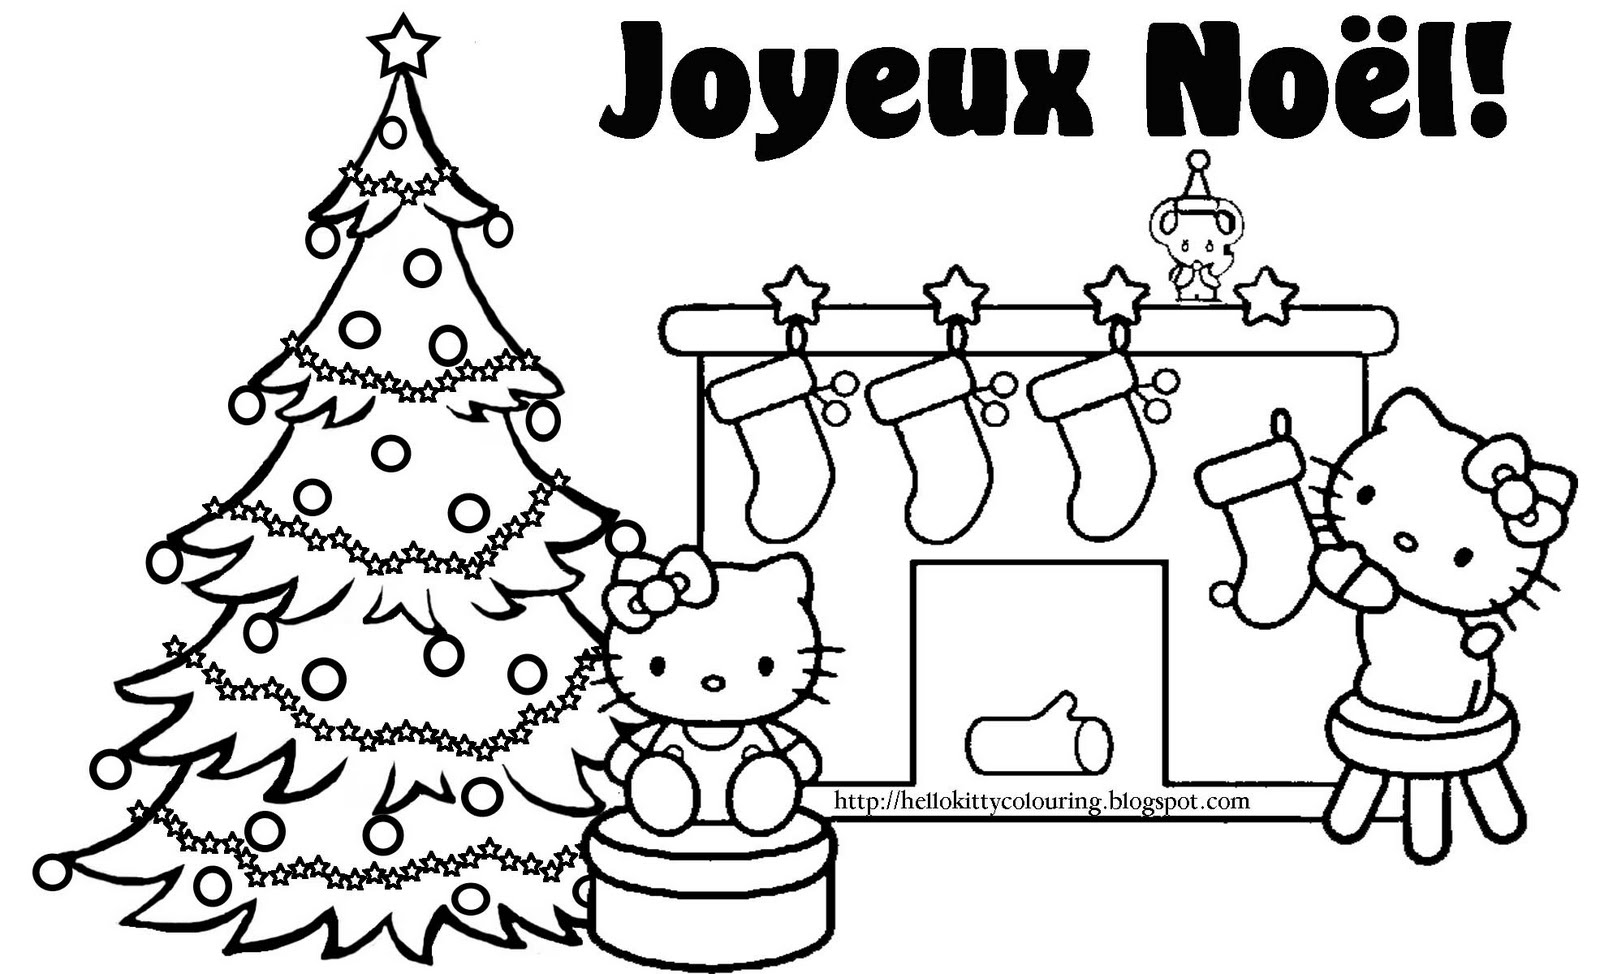 Download Hello Kitty Christmas Coloring Pages #2 | Hello Kitty Forever